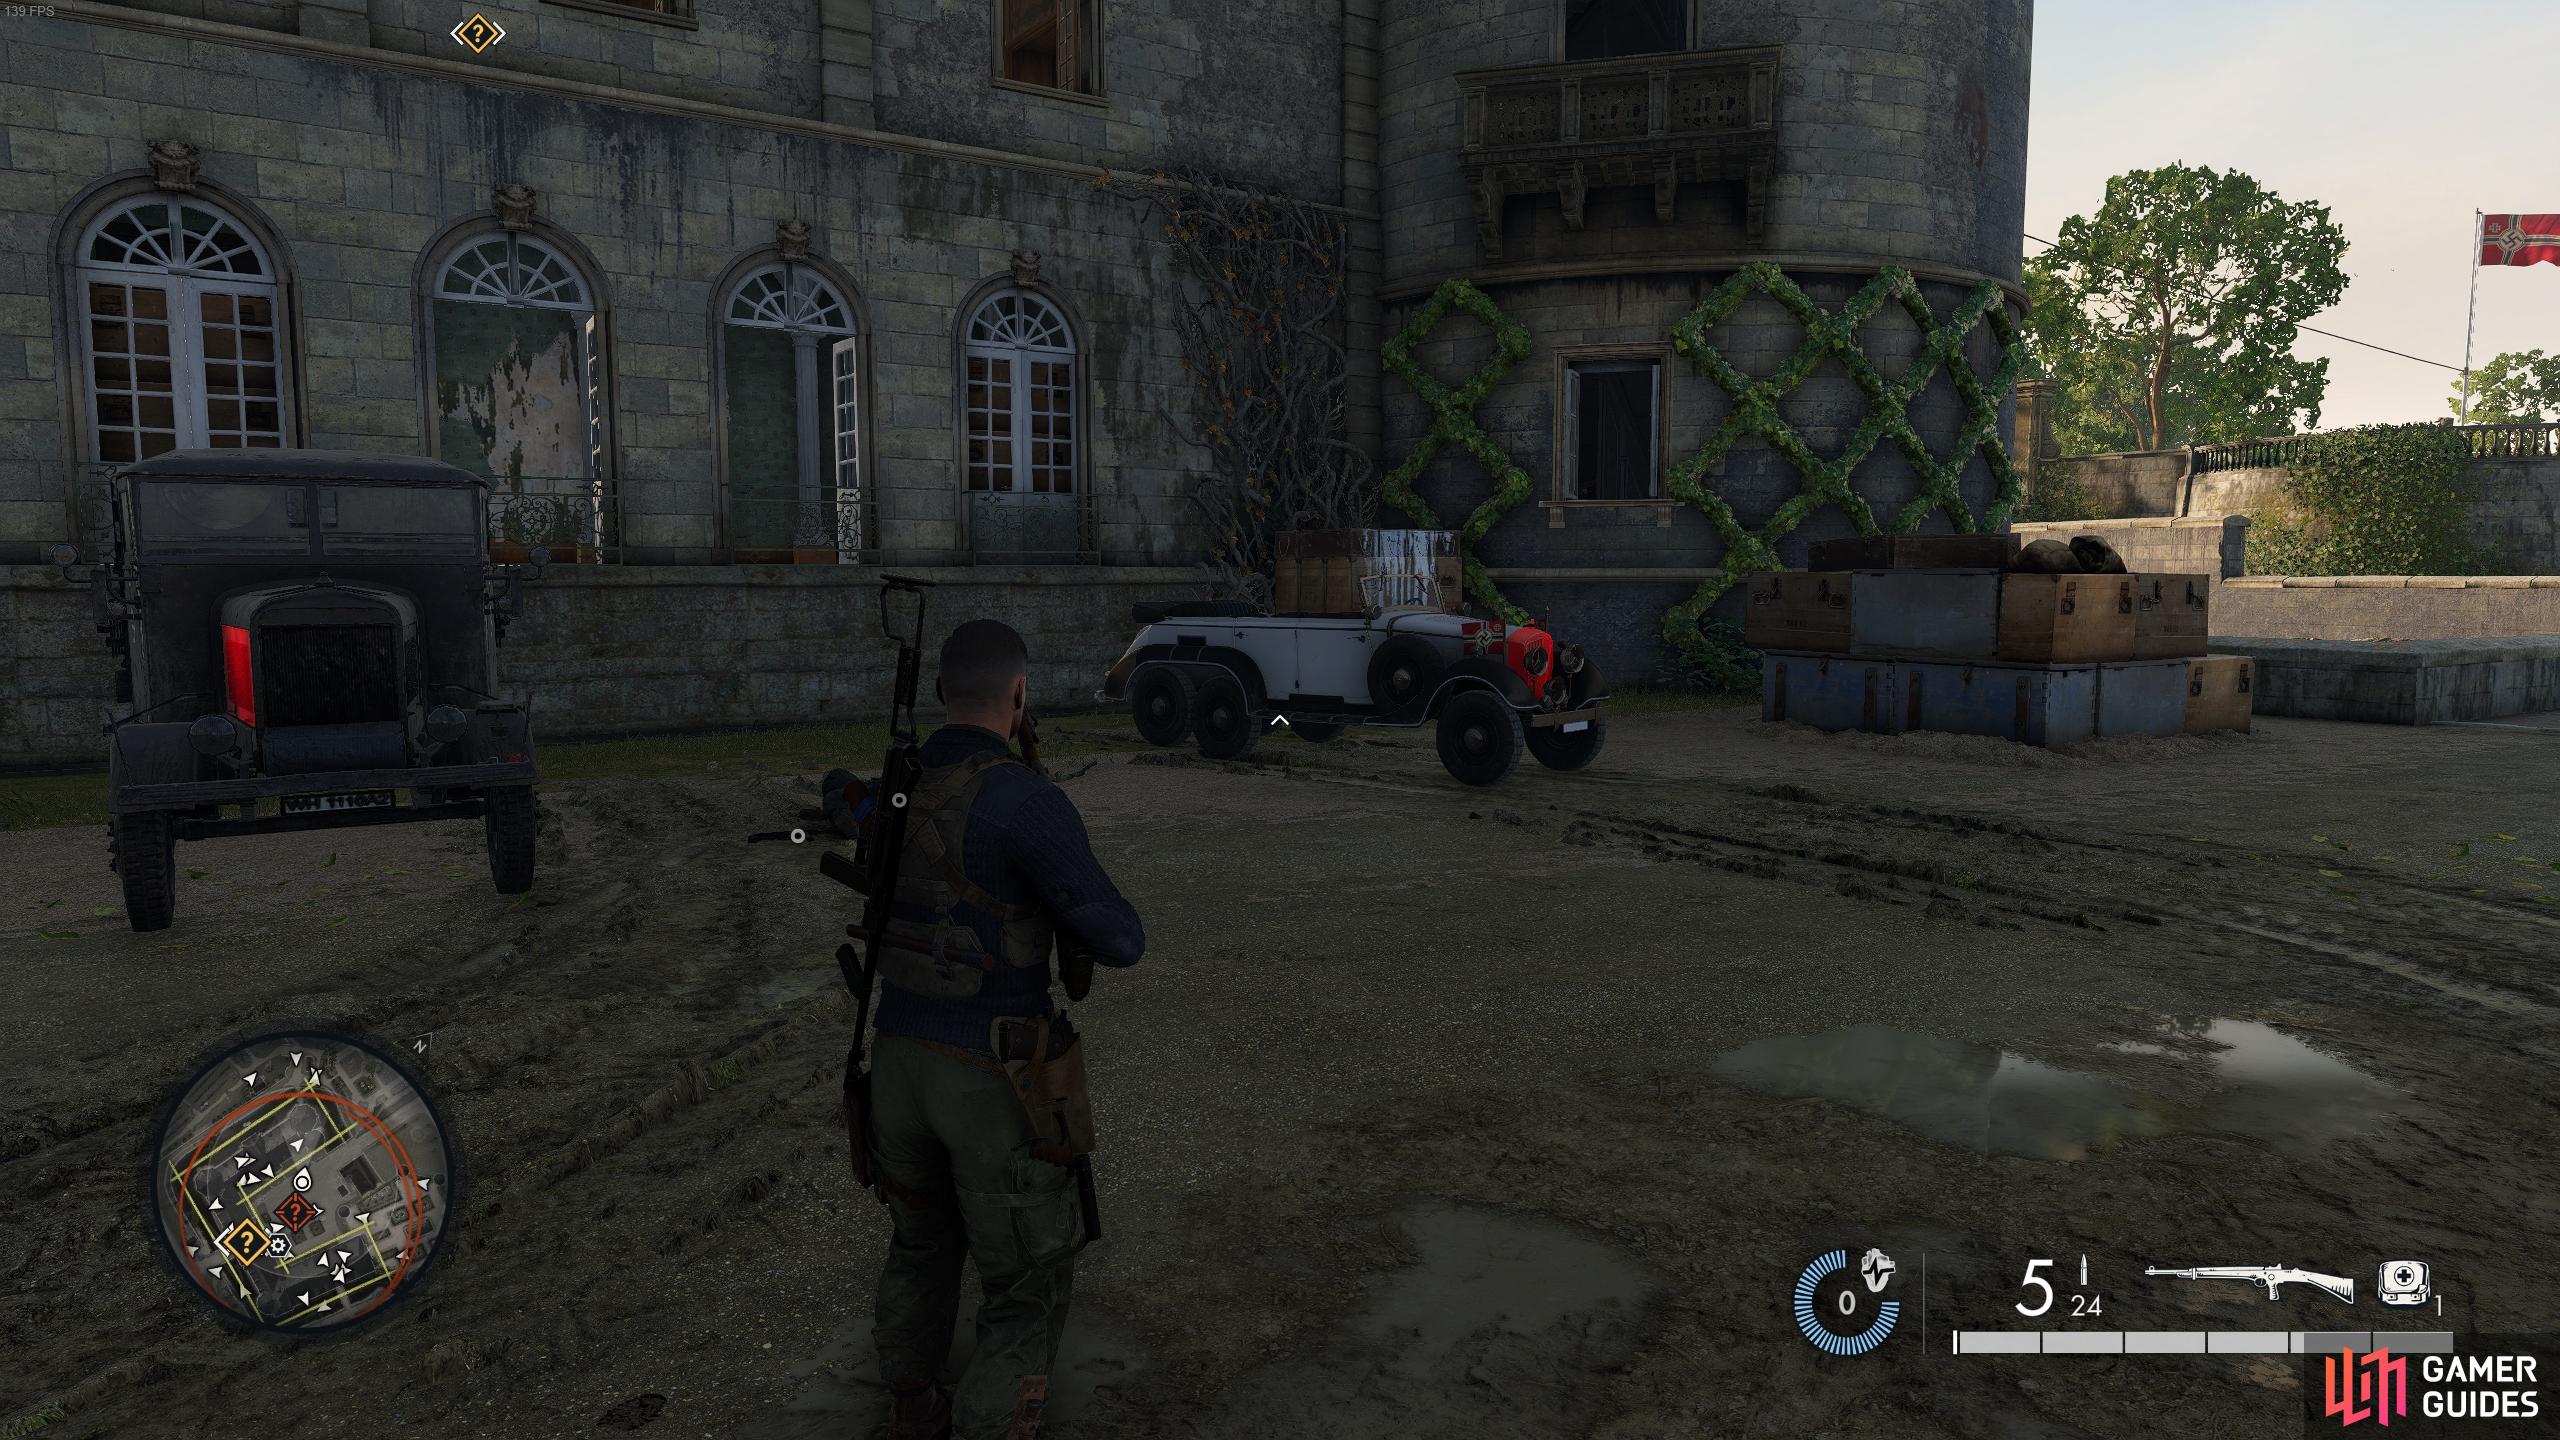 You'll find Möller's car in the courtyard of the mansion on the Occupied Residence map.